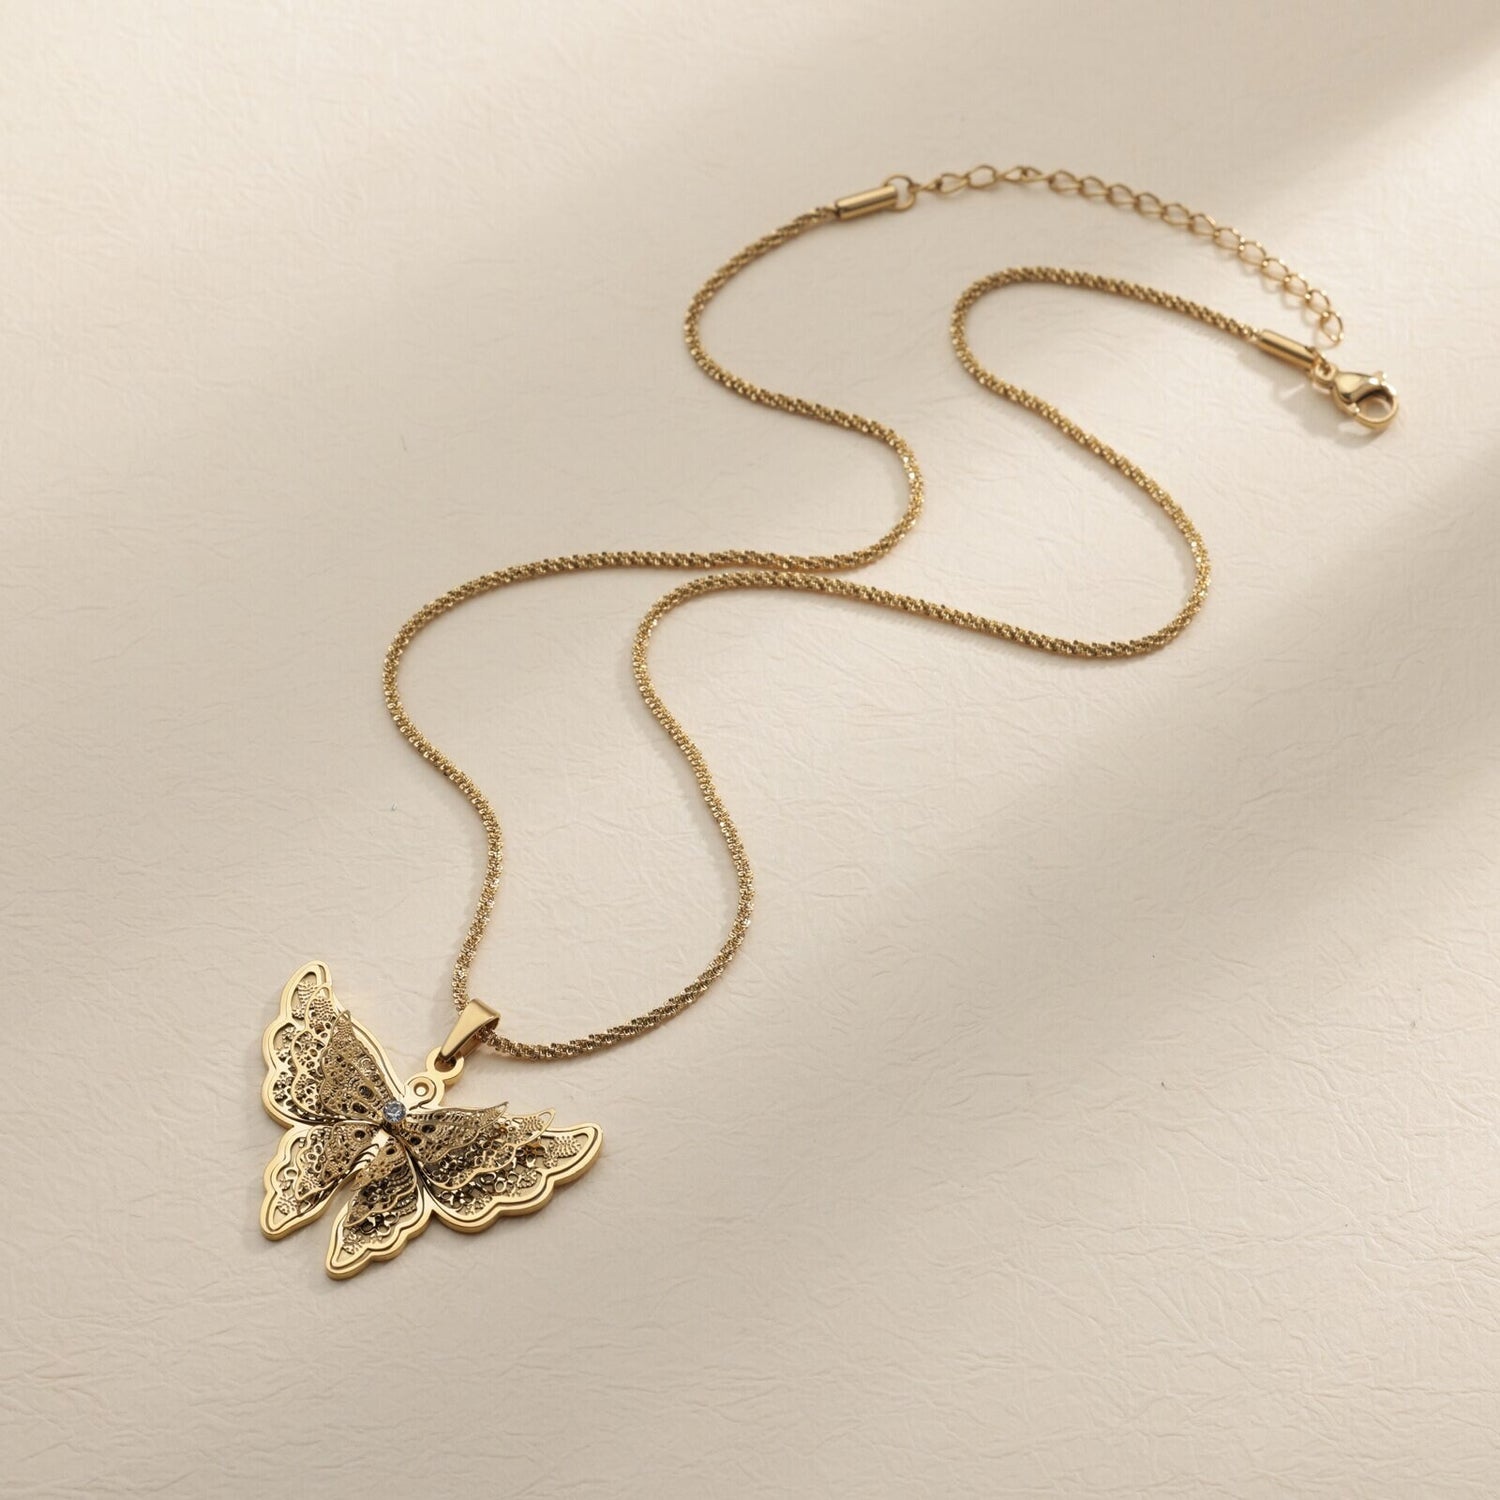 Boho Gold Butterfly Charm Pendant, Punk 18K Gold Butterfly Necklace, Elegant Dainty Minimalist Pendant for Women, Gift for Her